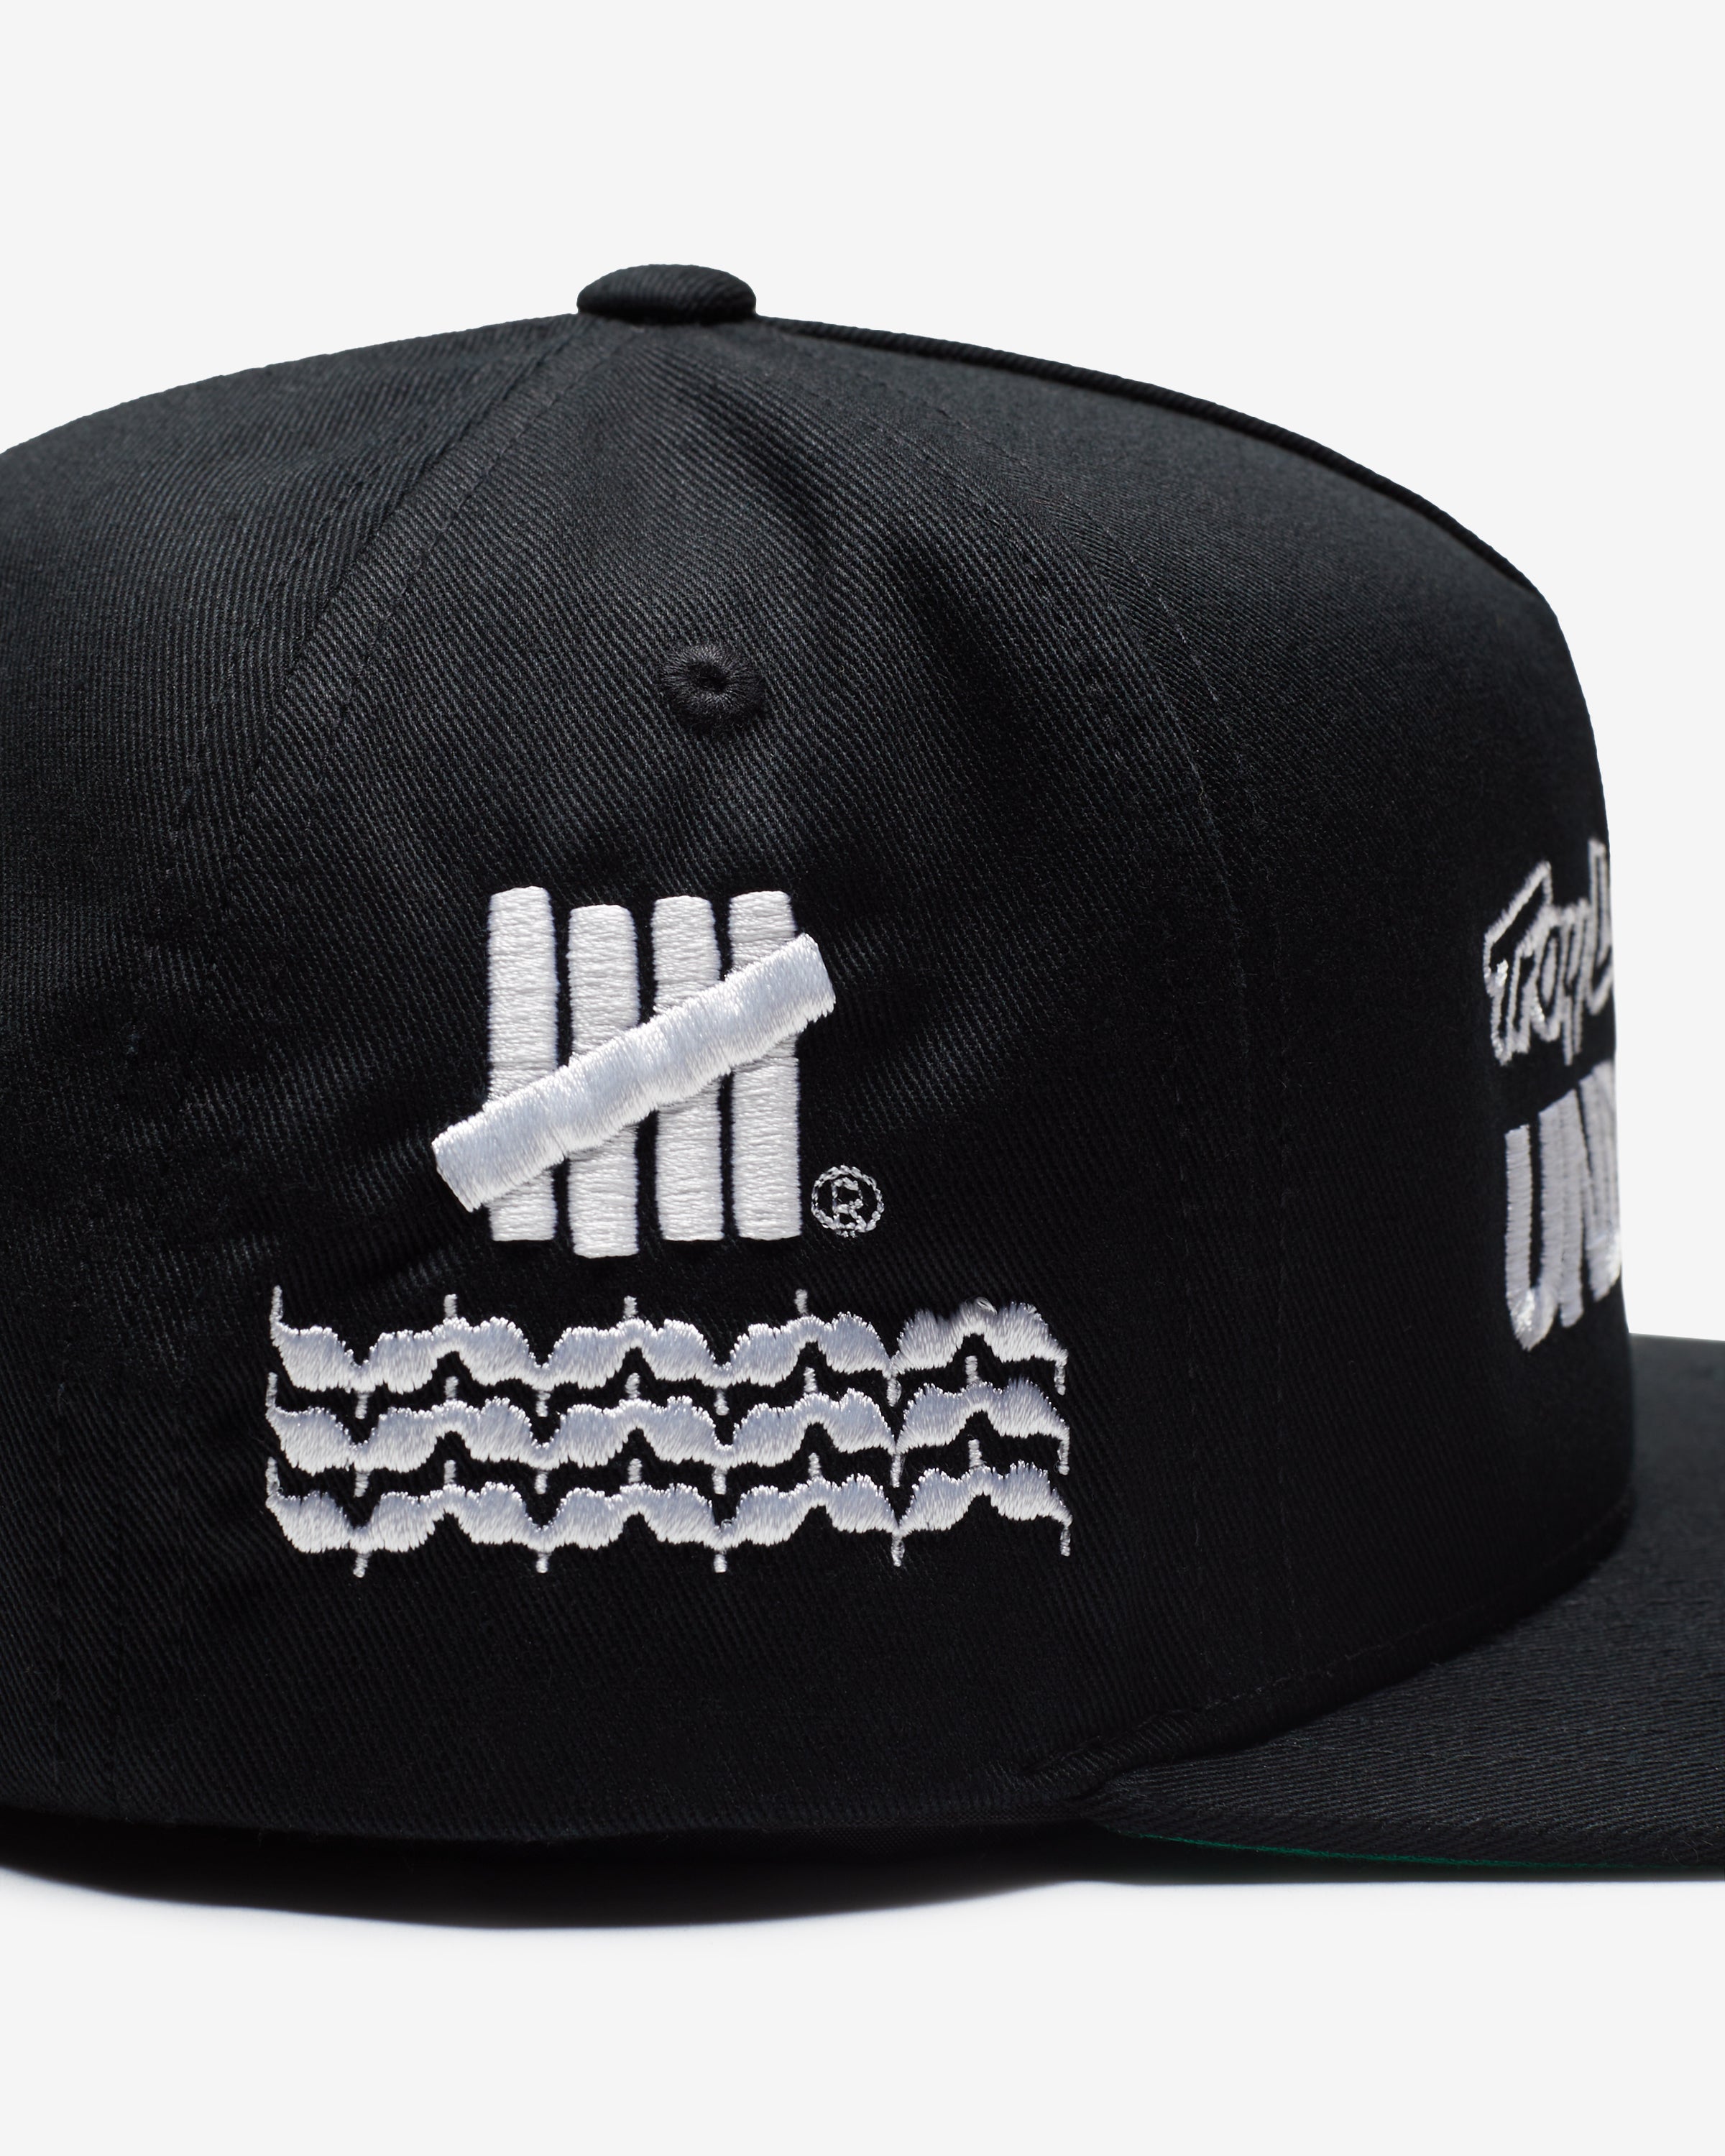 UNDEFEATED X TROY LEE DESIGNS SNAPBACK - BLACK